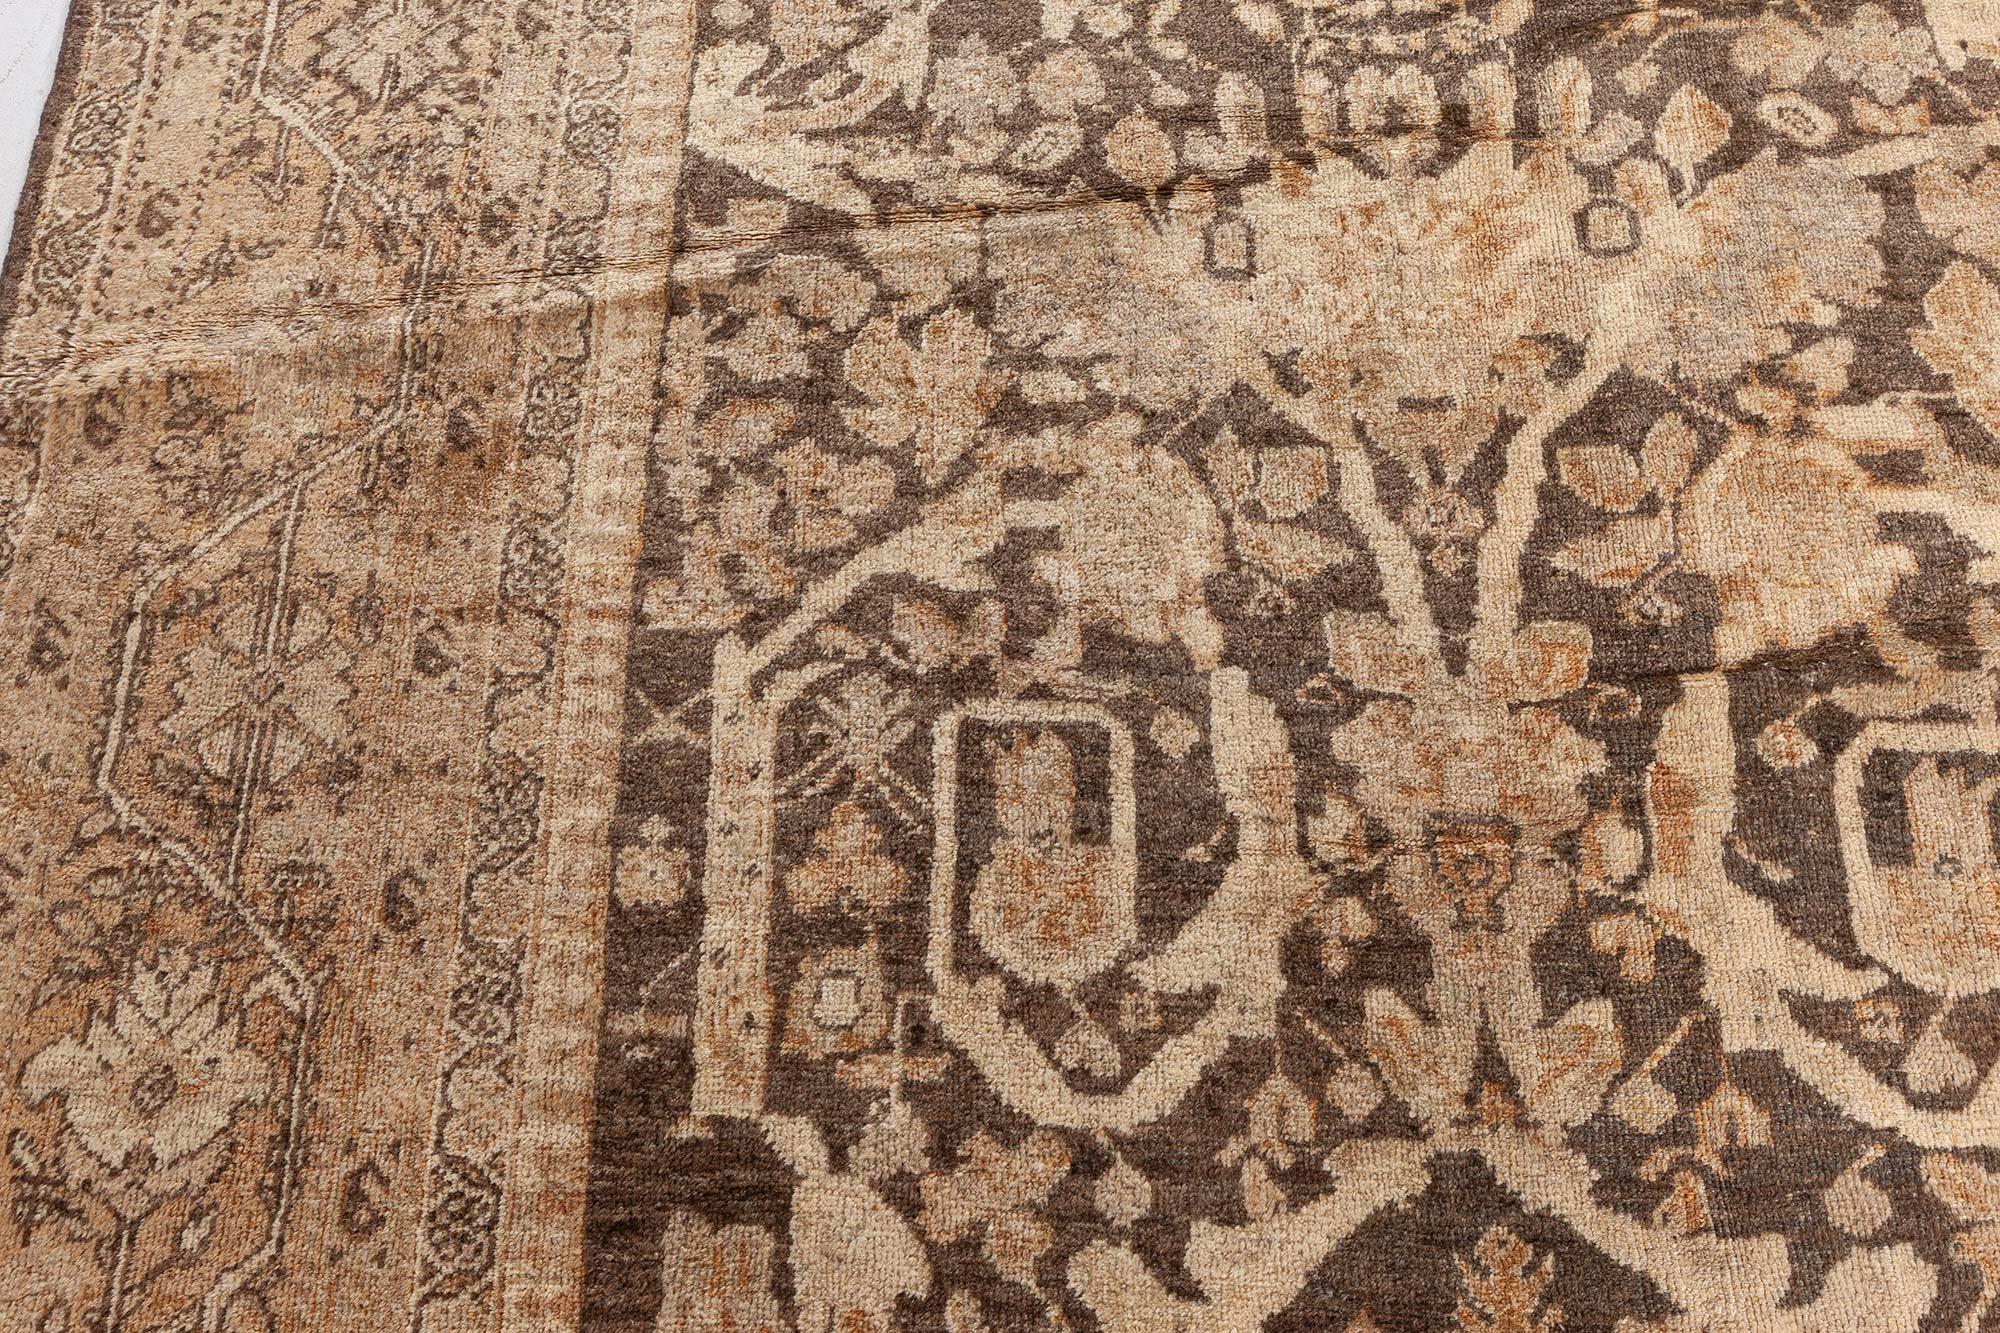 Antique Persian Sultanabad brown handmade wool carpet
Size: 11'3